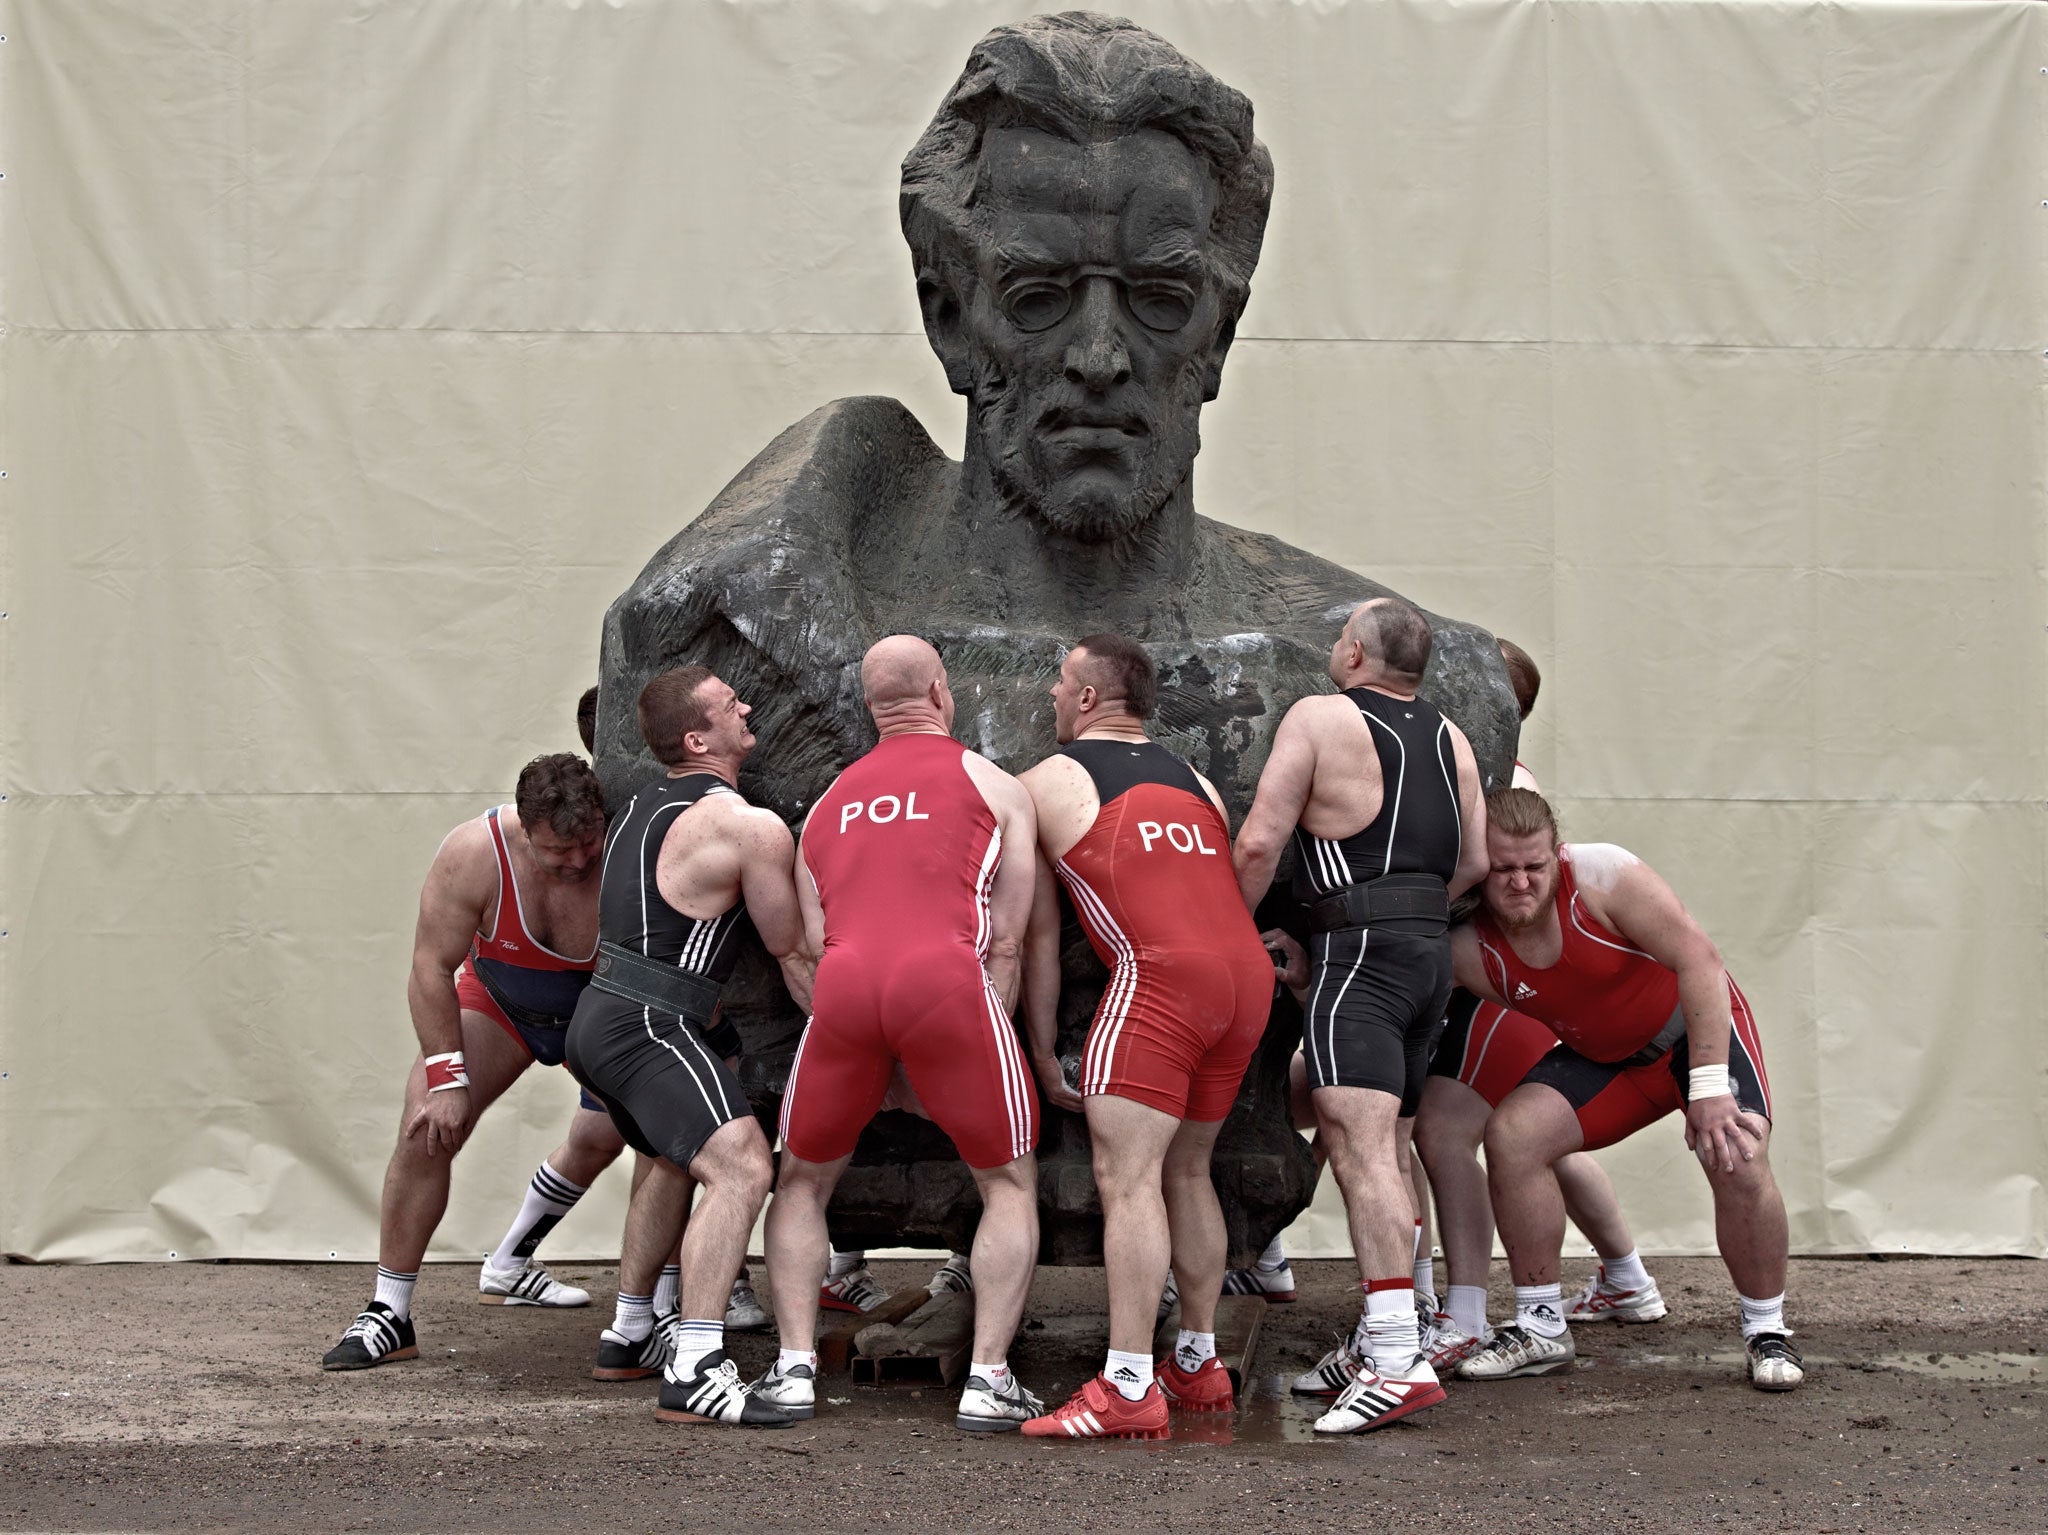 Weight of history: The weightlifters literally placing the burden of Warsaw's past on their shoulders